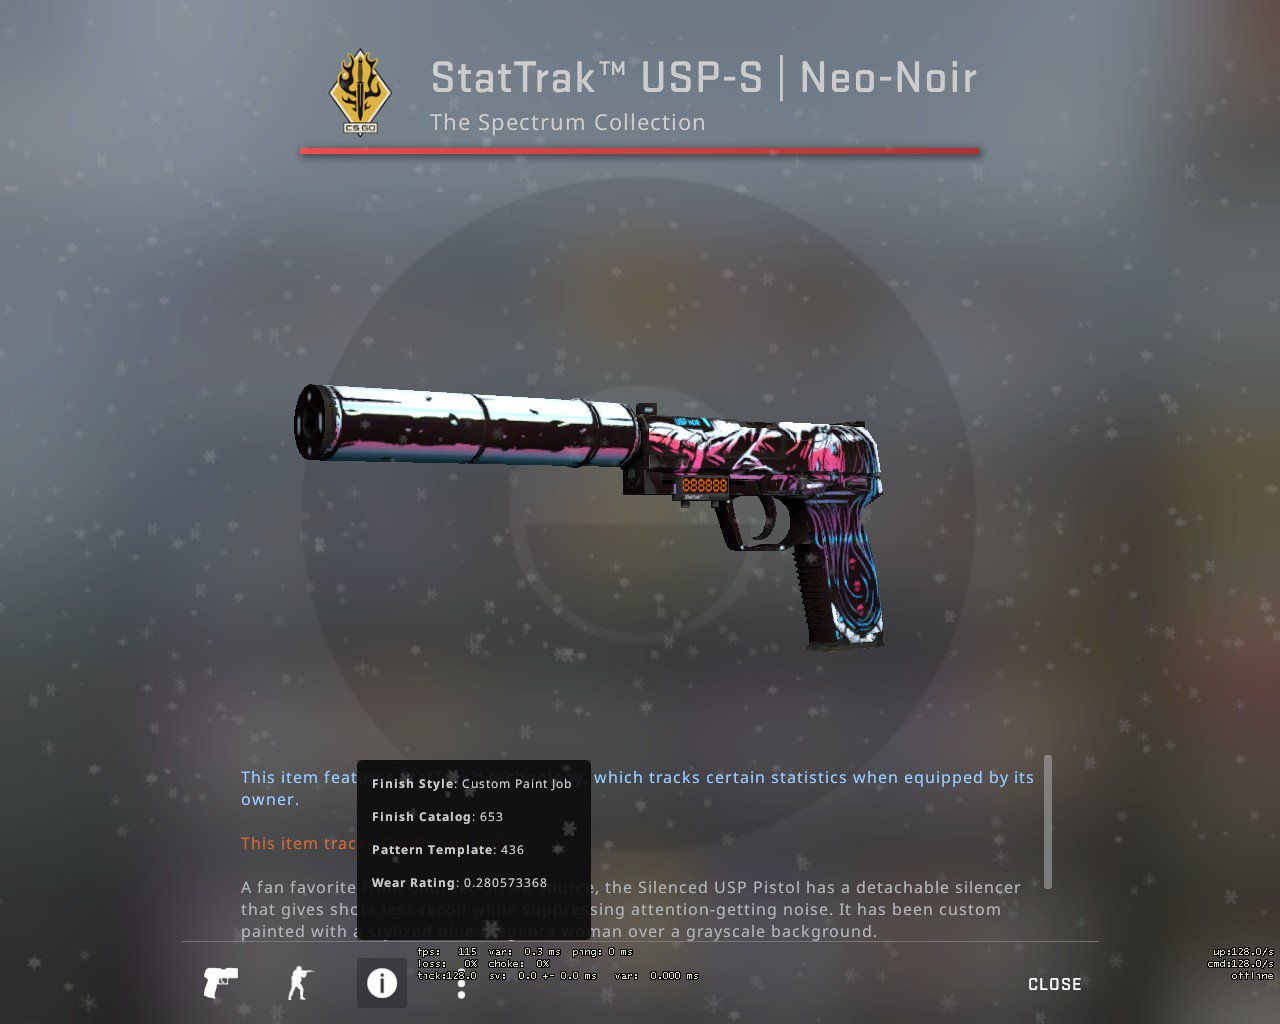 Robin Röpke on Twitter: "Since christmas is around the corner, I decided to do giveaway of this beautiful StatTrak | Neo-Noir (Field-Tested) to celebrate with you guys To enter, as